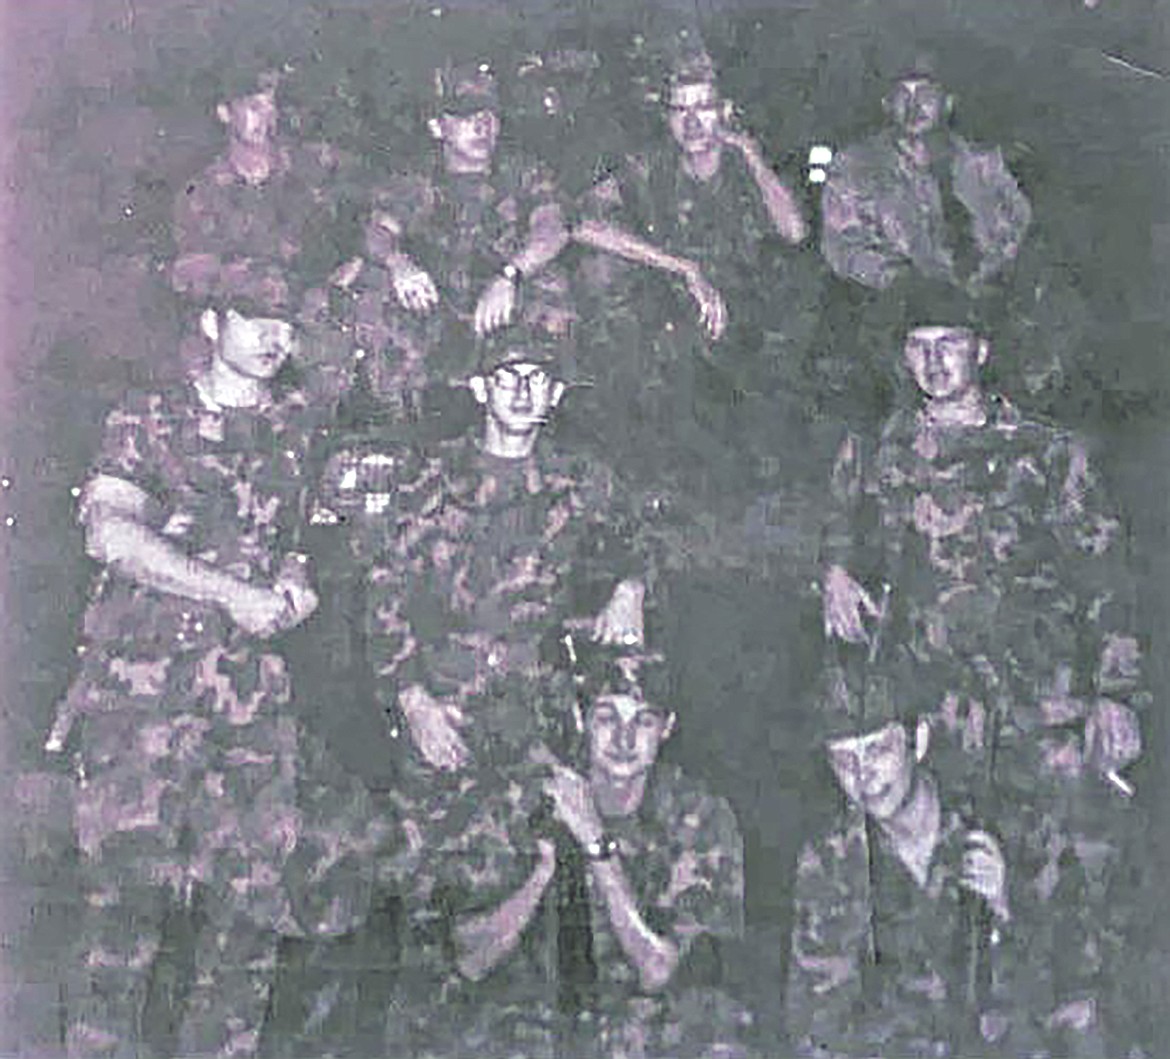 A photo showing some of the Knife-13 crew. En route to a rescue mission, the helicopter crashed on May 13, 1975, killing 18 security police and its five-man crew.